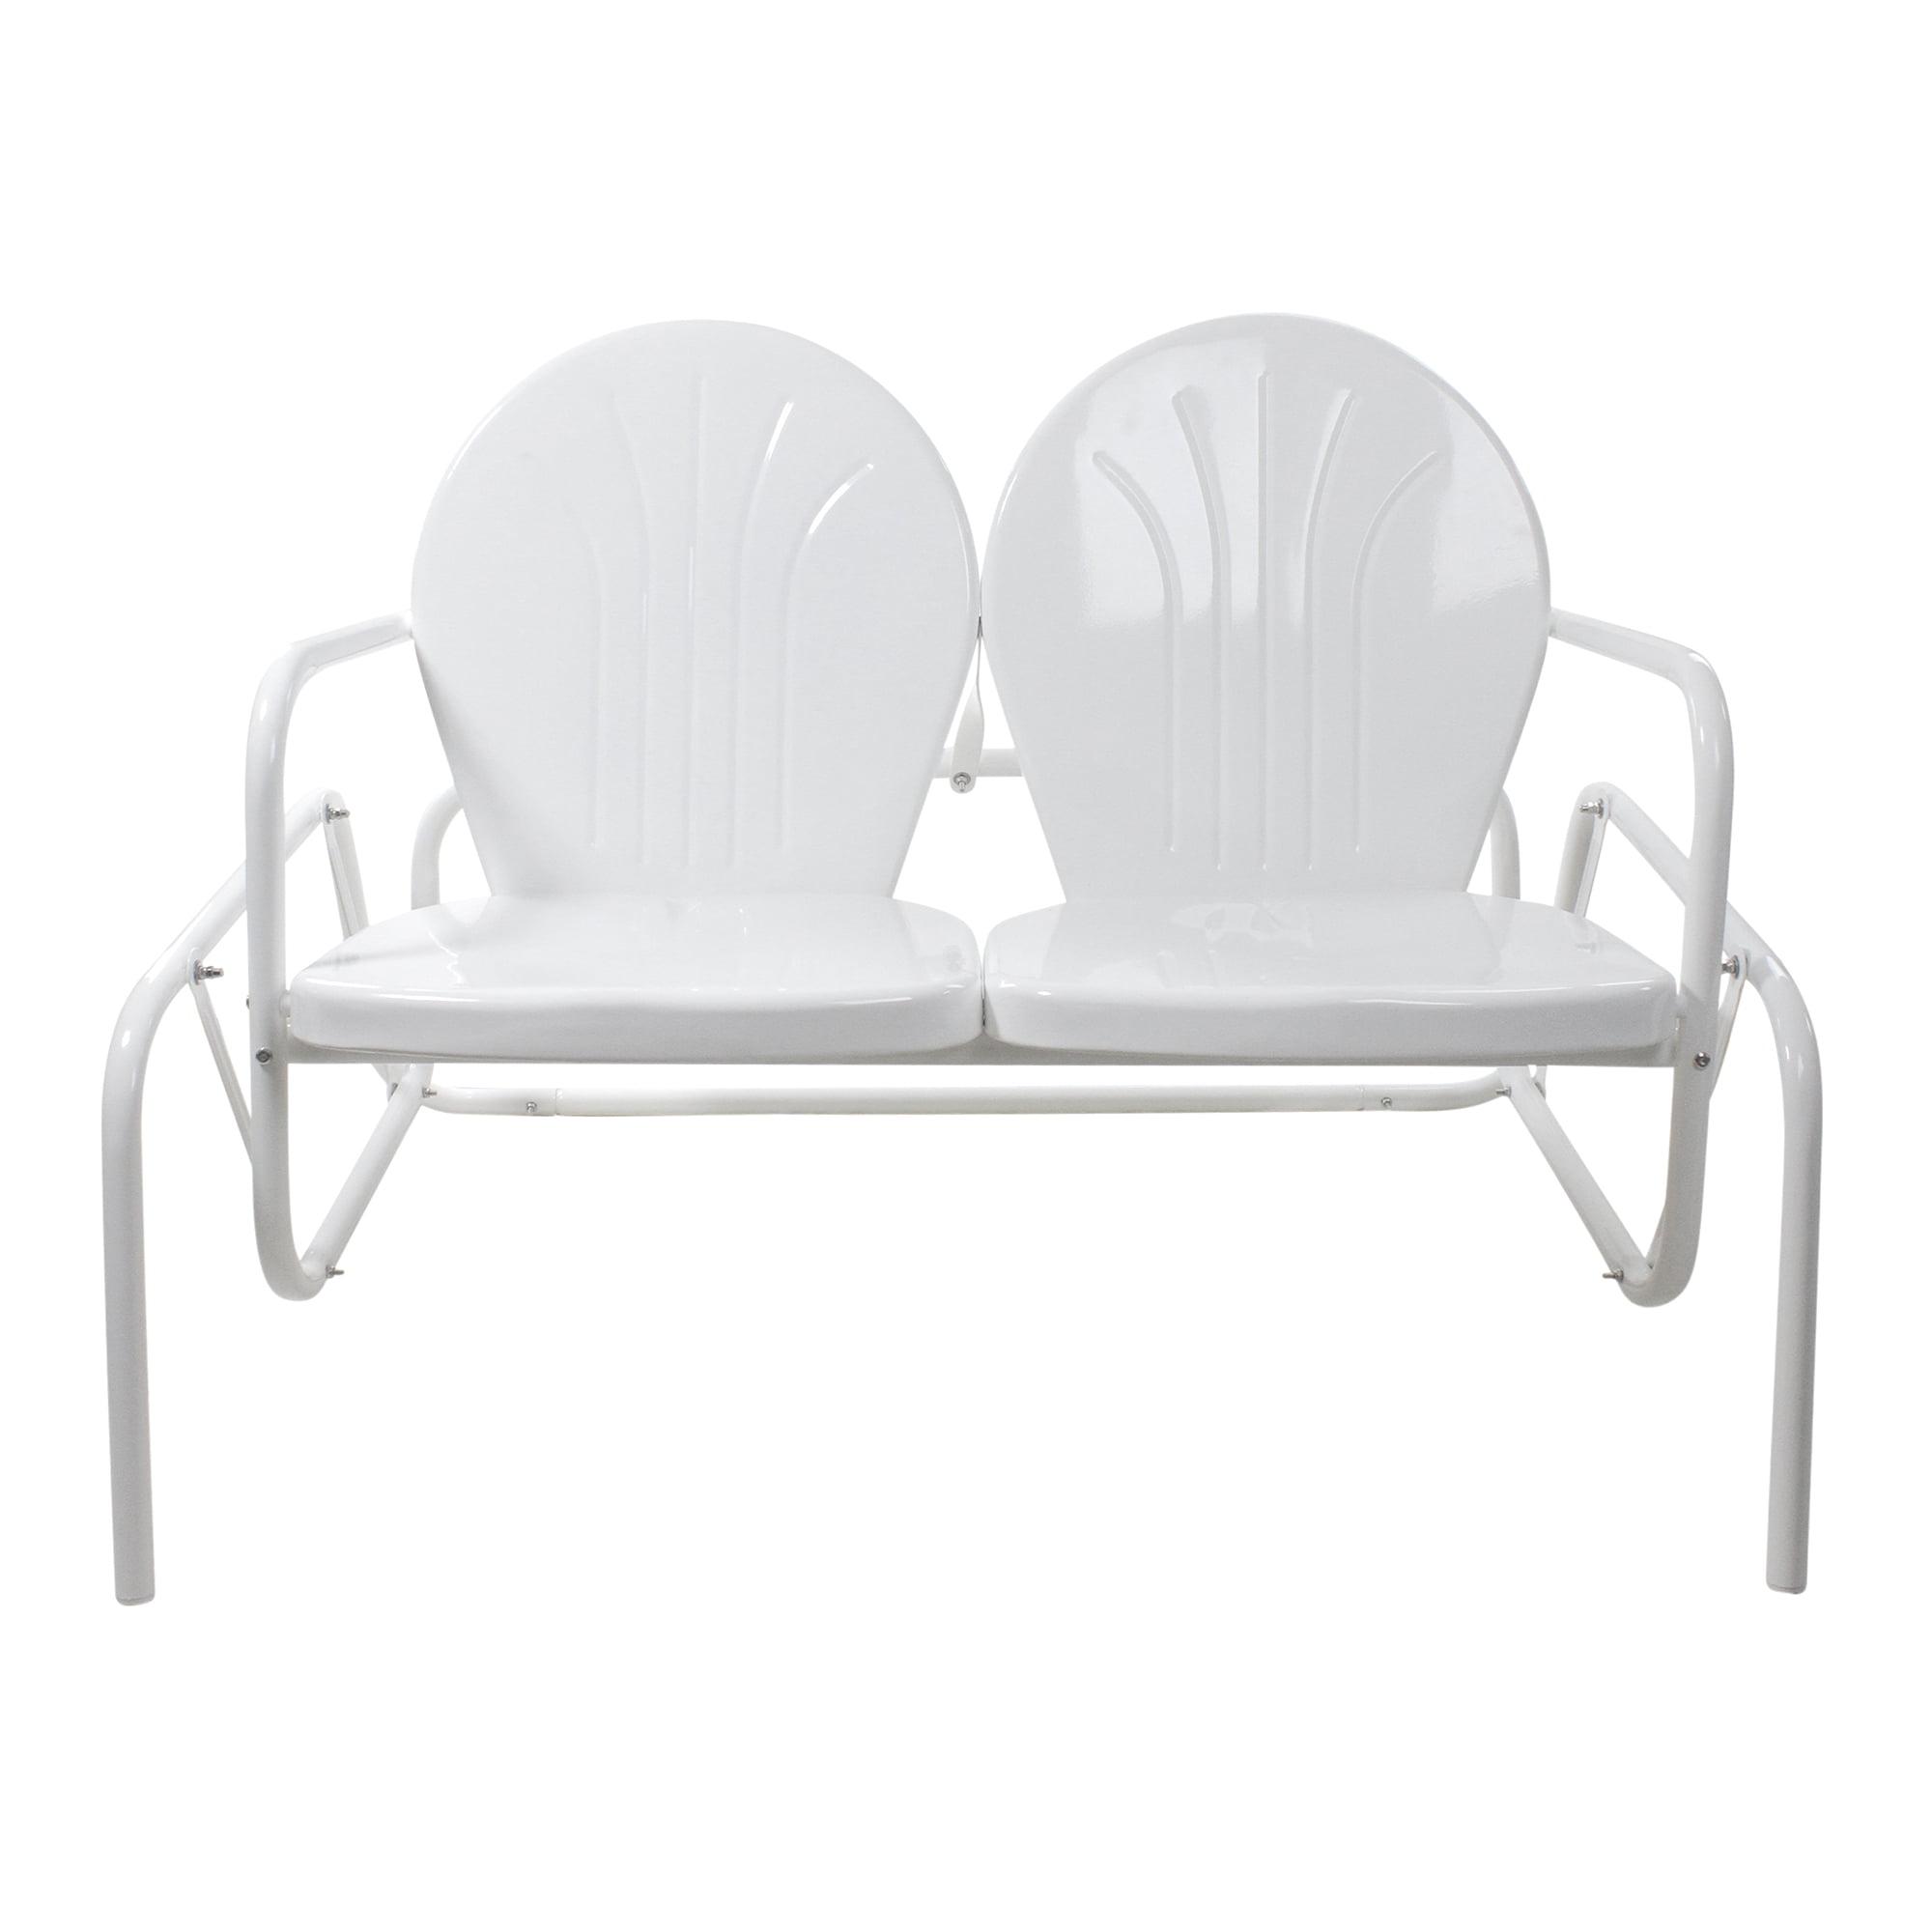 Retro White Metal Double Glider Outdoor Chair, 48-Inch